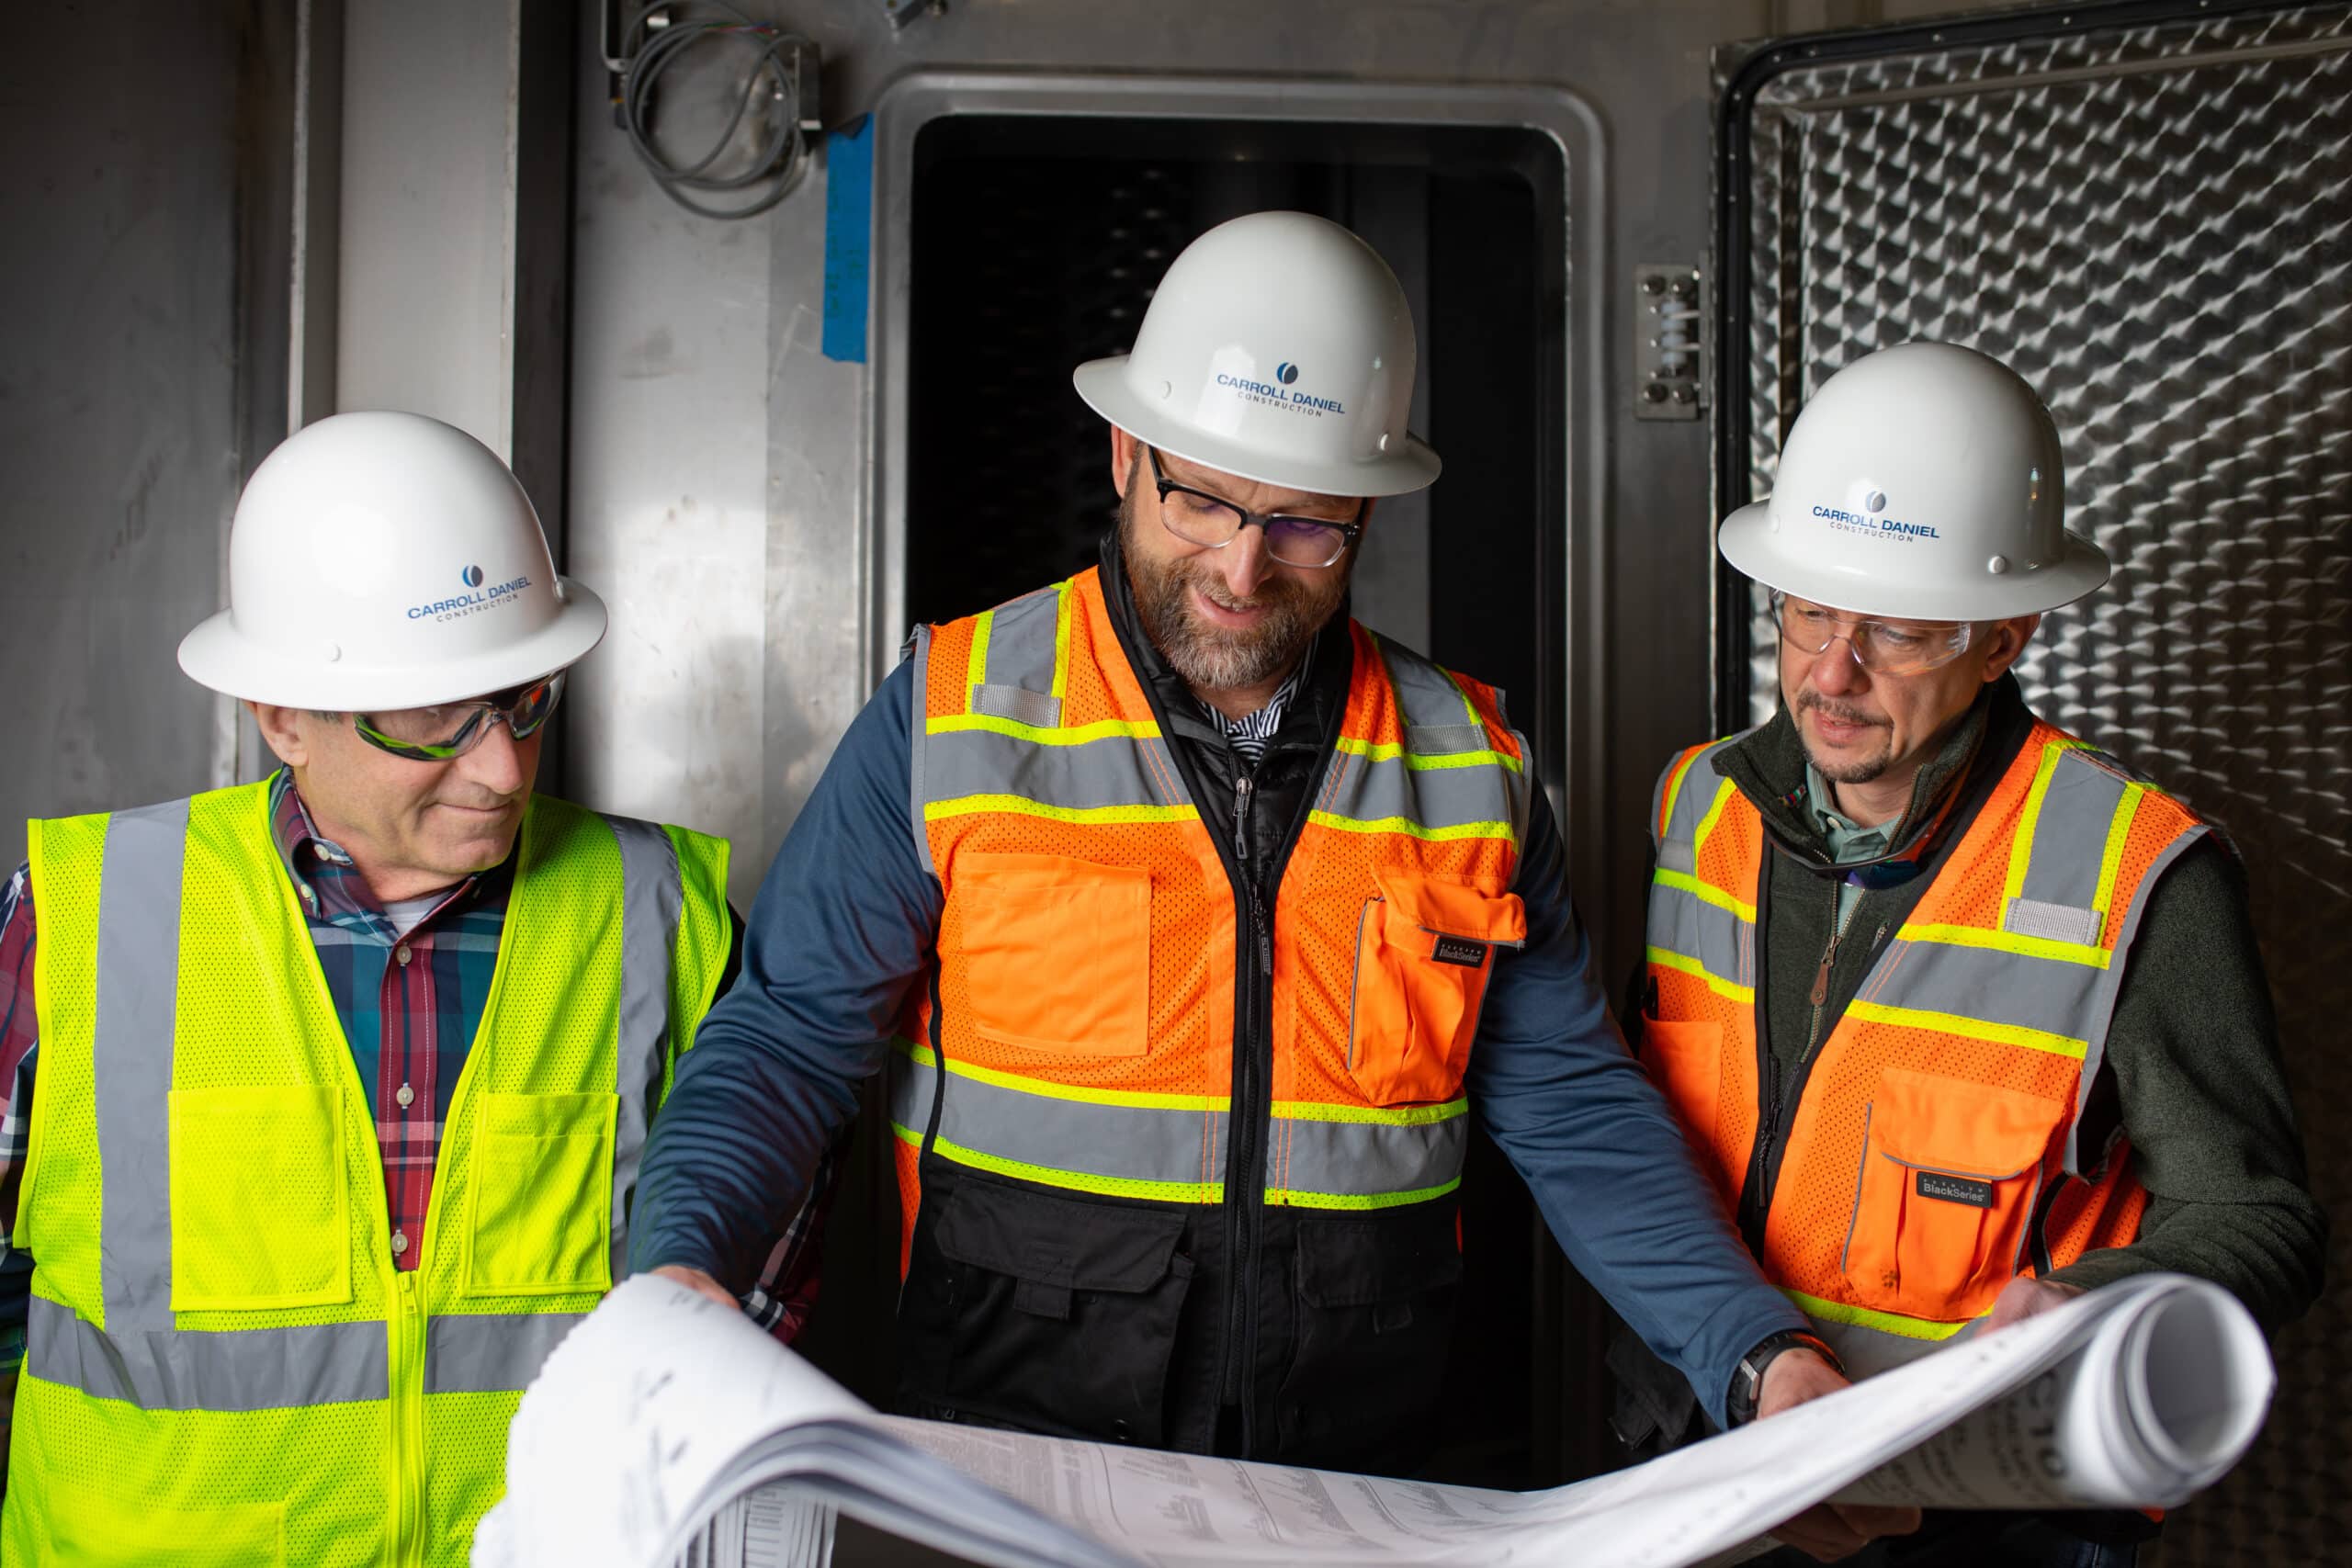 three men in hard hats, safety vest, and safety goggles look over a set of architectural plans